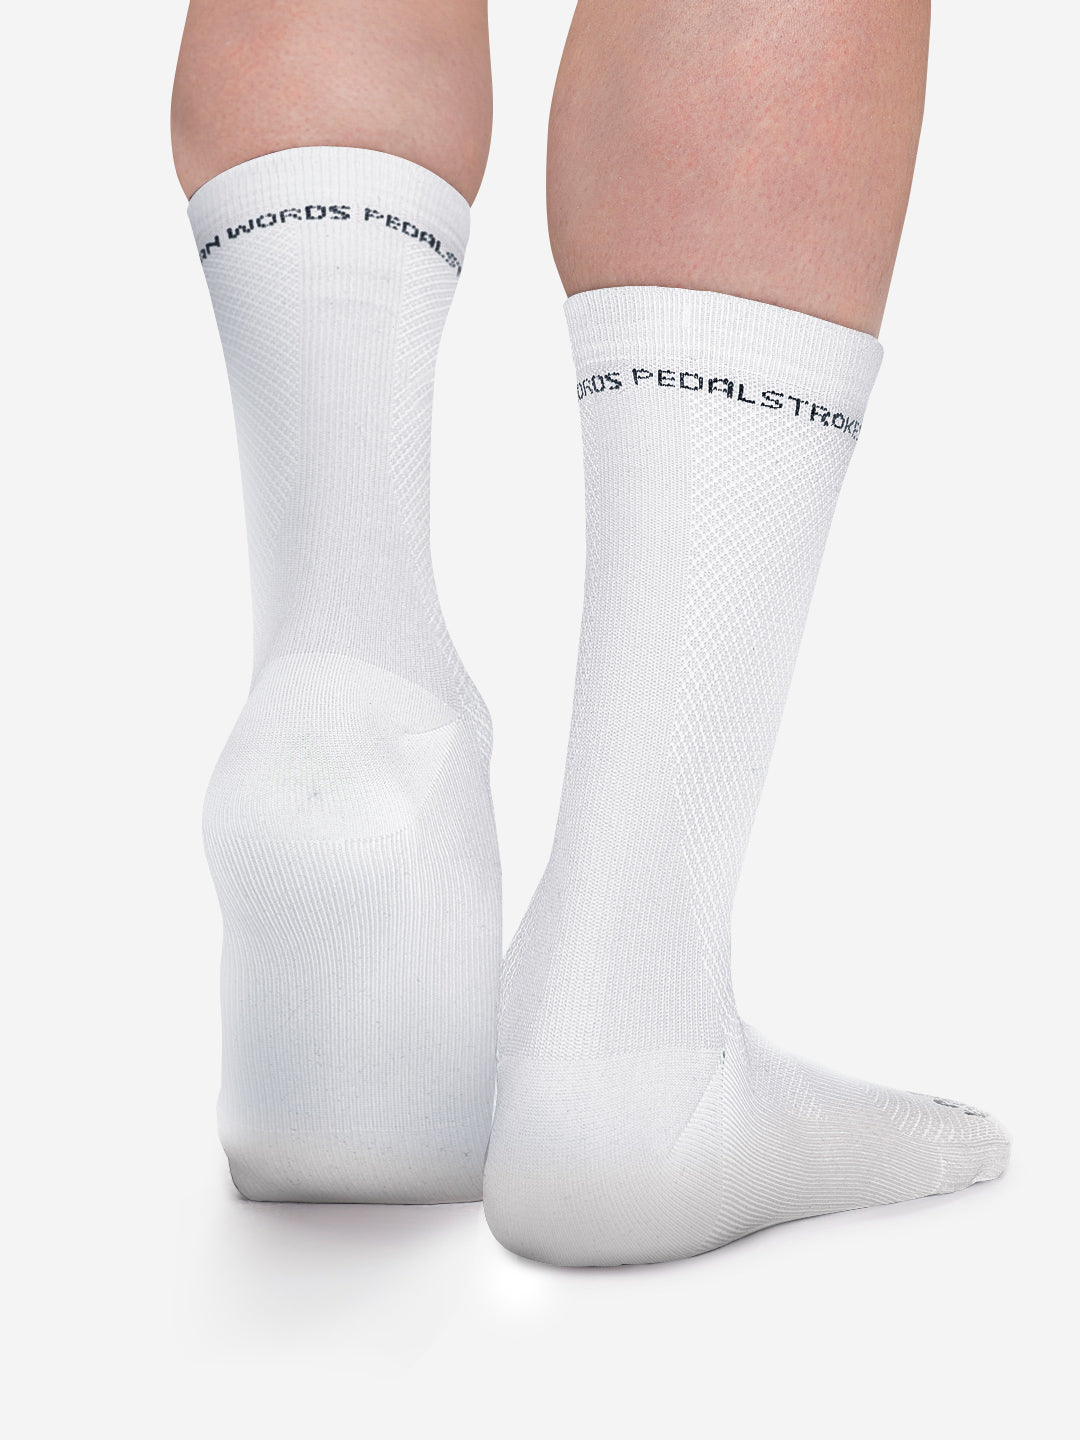 Louder than words - Cycling Socks - White